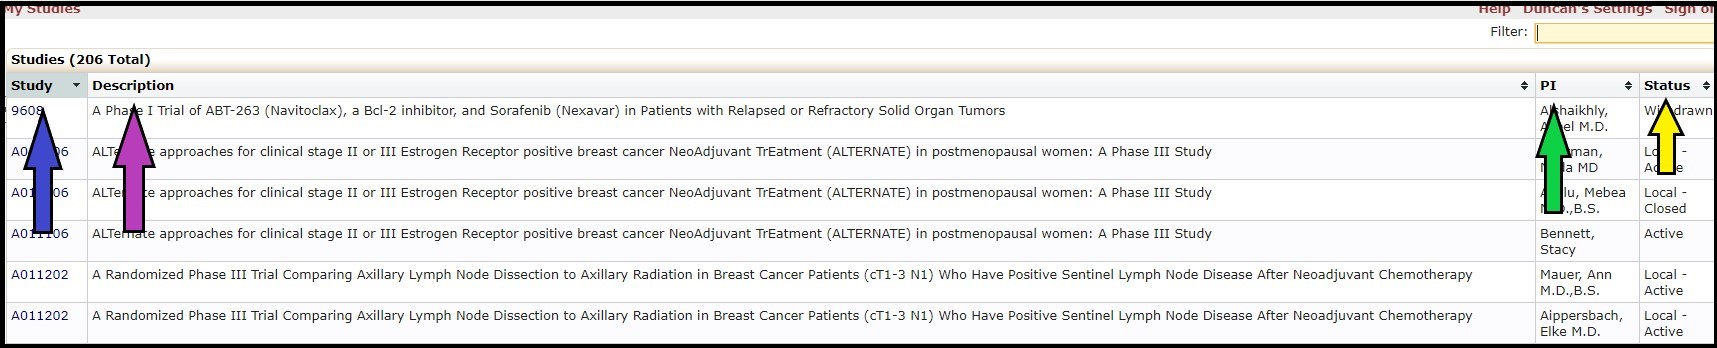 Screenshot of the total list of studies under the user dashboard in IRBManager